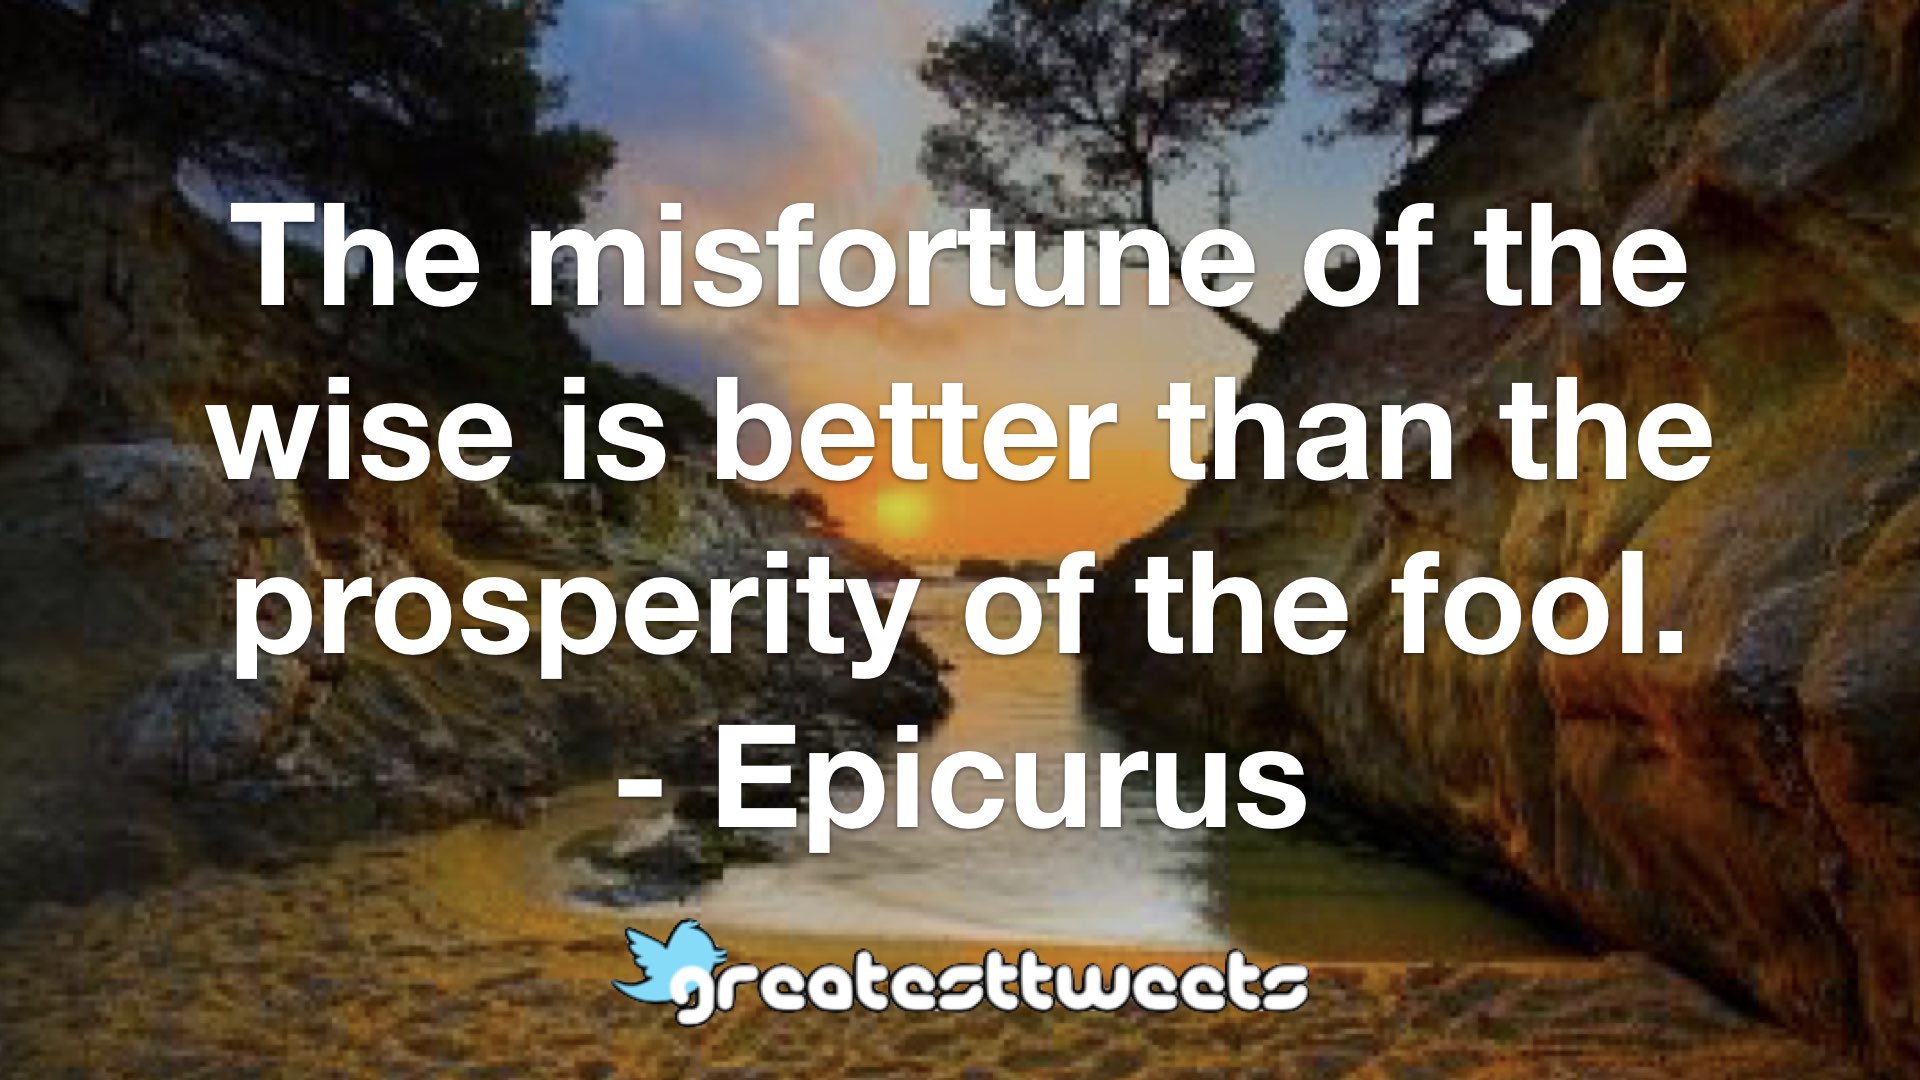 The misfortune of the wise is better than the prosperity of the fool. Epicurus.001